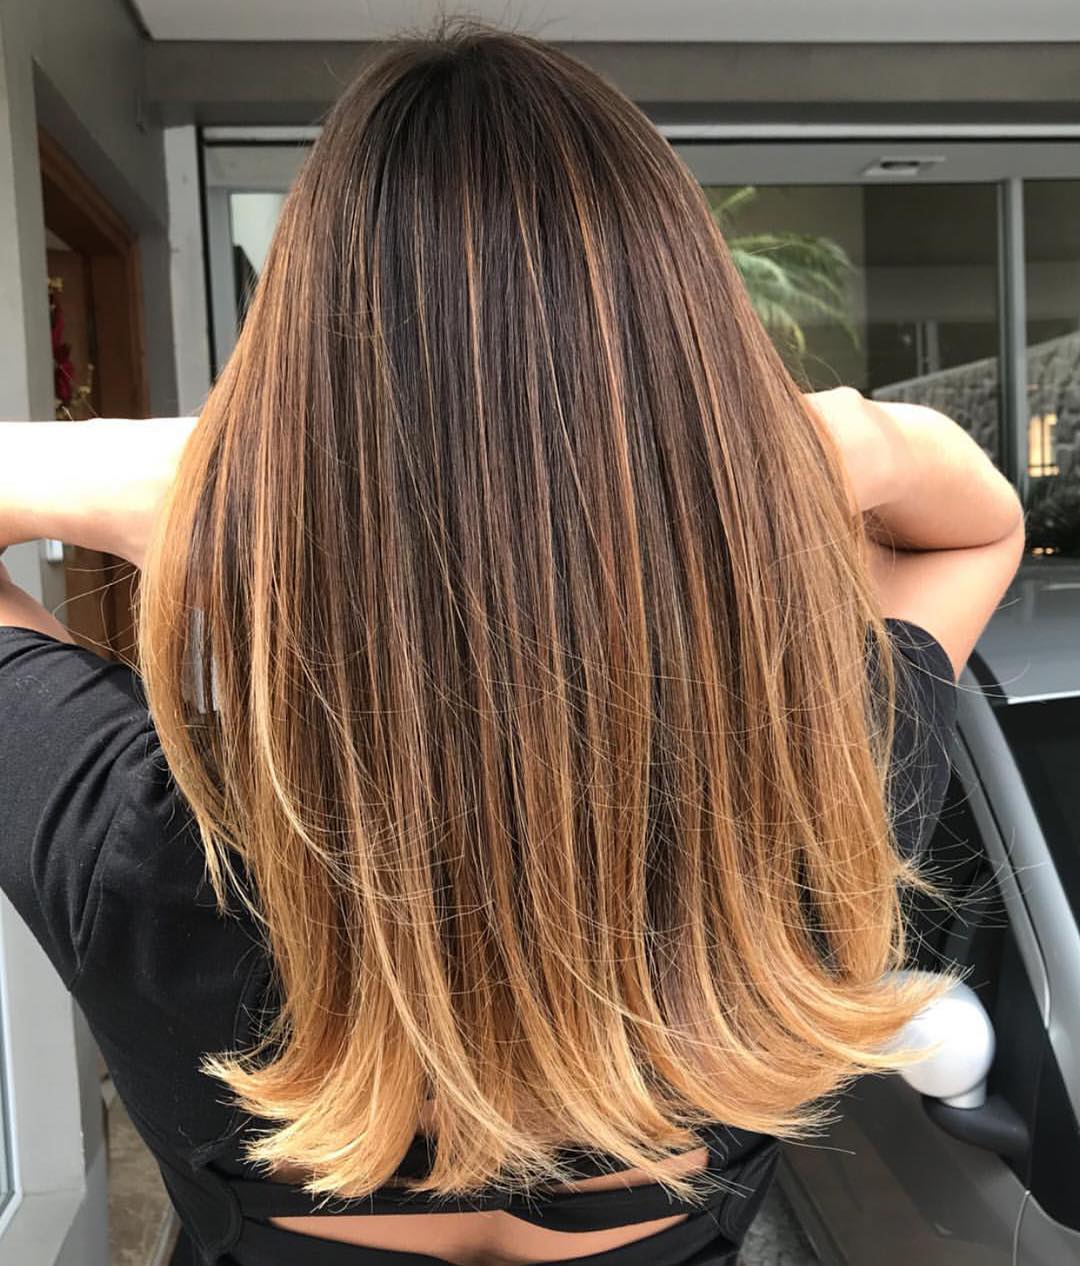 Long Dark Hair With Copper Balayage